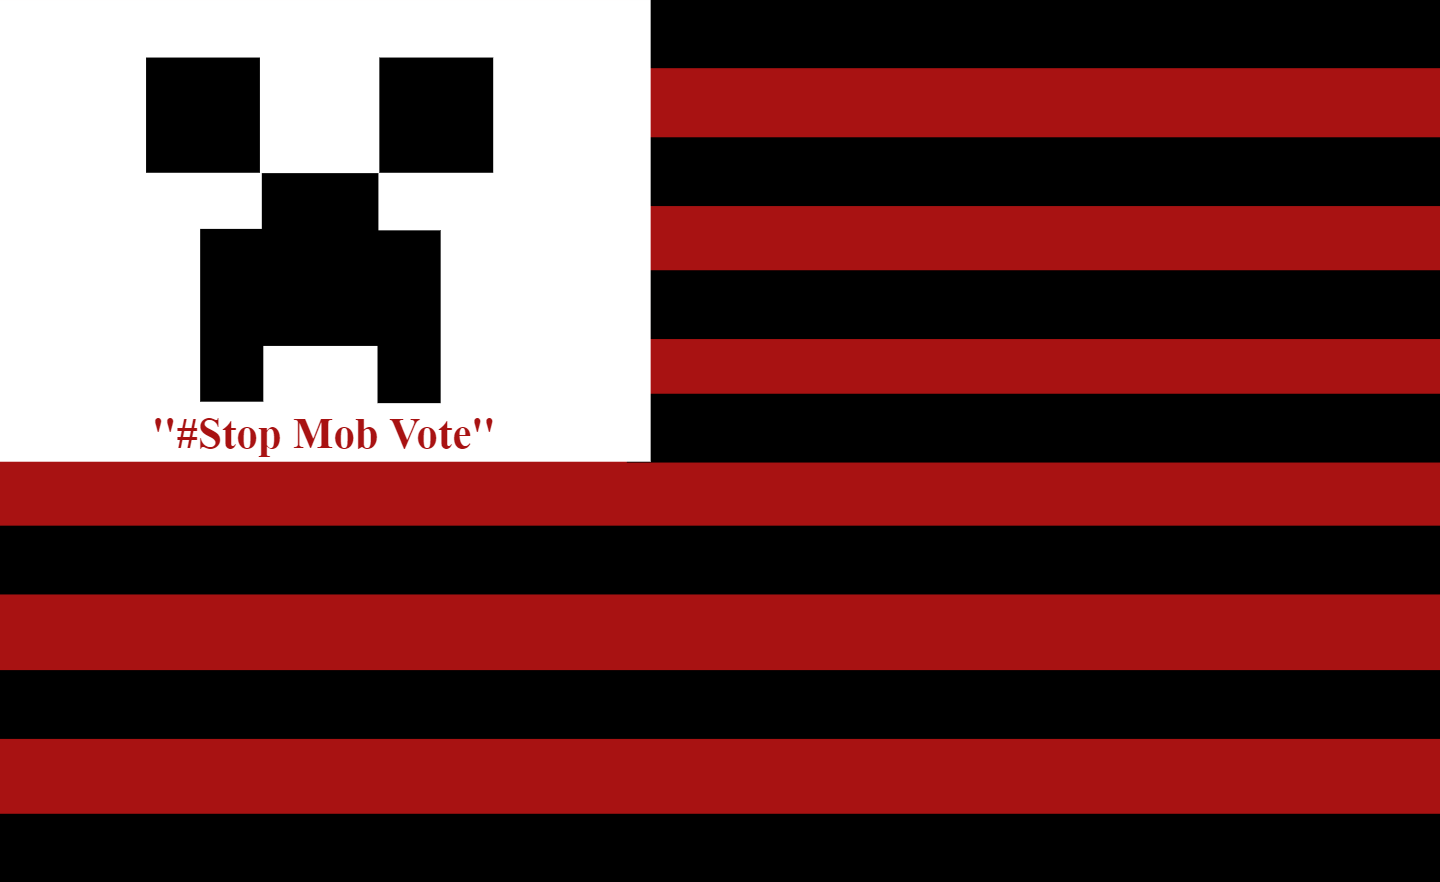 Minecraft Memes - It's the flag of the #Stop mob vote Bro💀☠